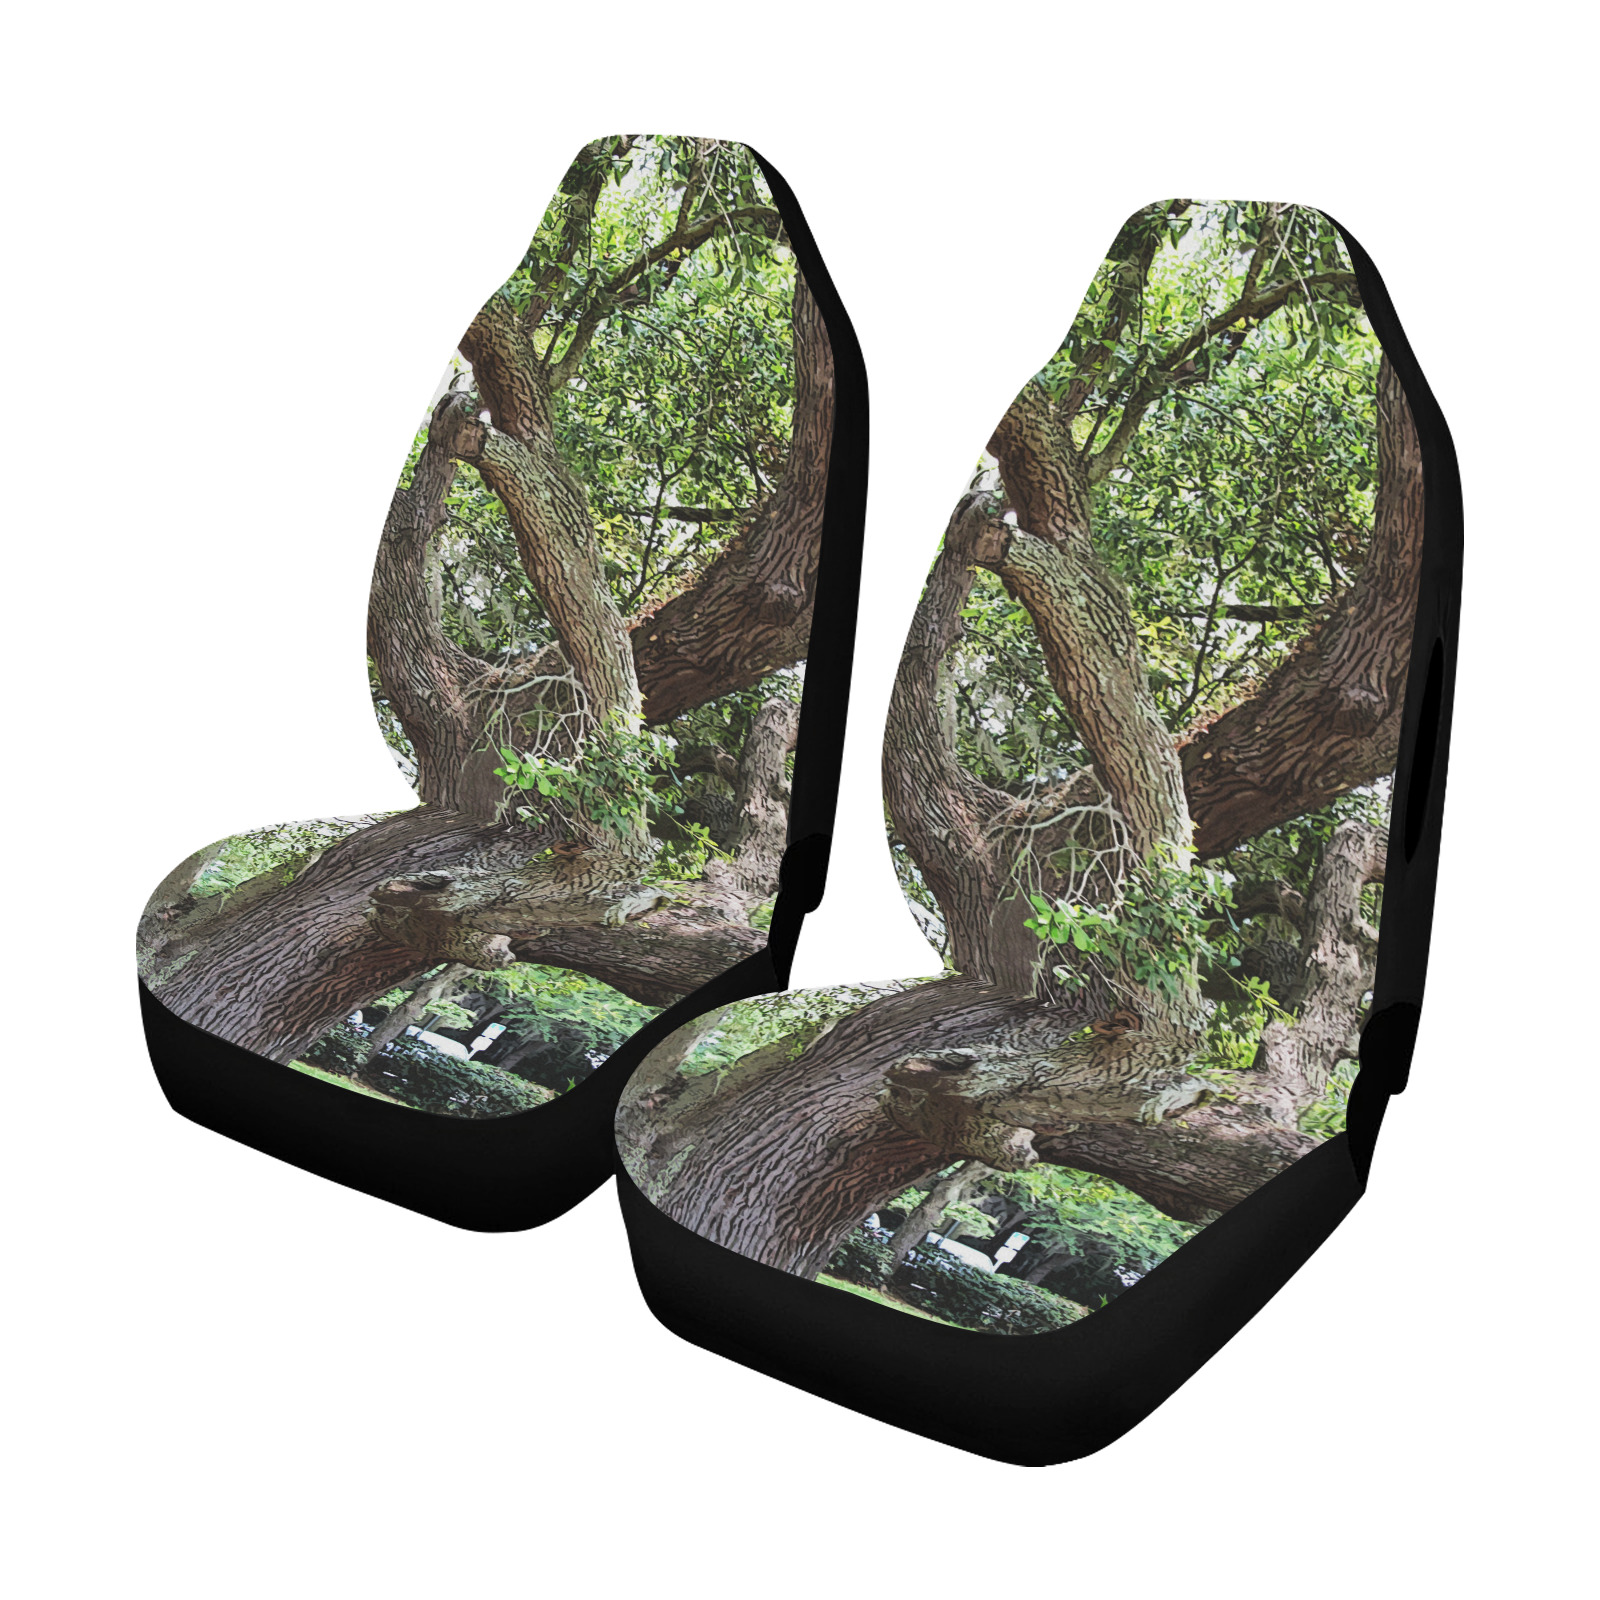 Oak Tree In The Park 7659 Stinson Park Jacksonville Florida Car Seat Cover Airbag Compatible (Set of 2)